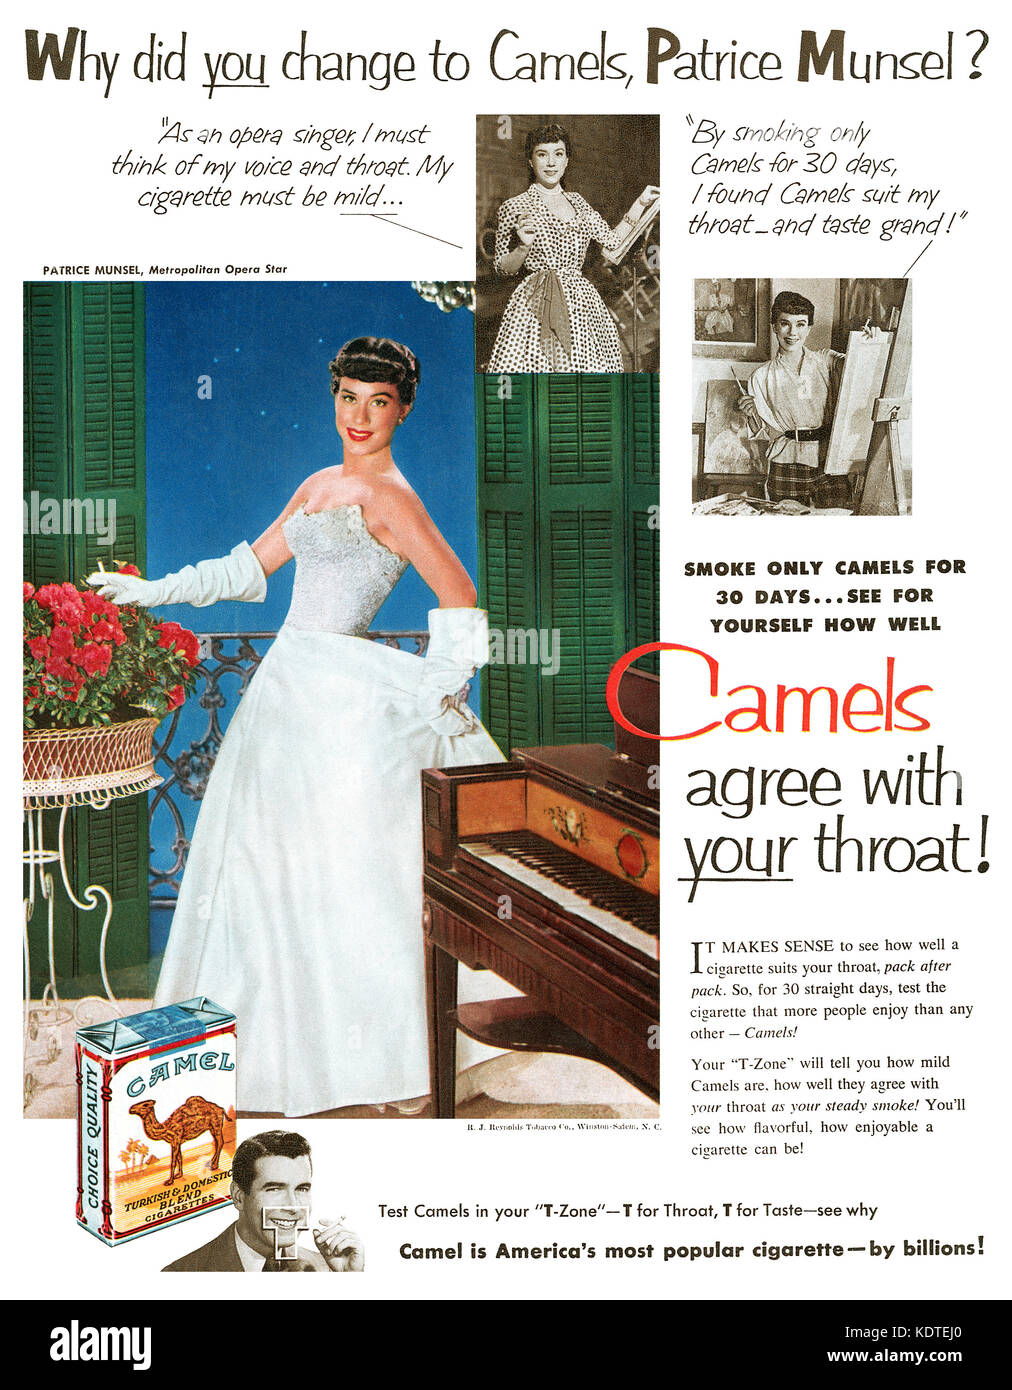 1952 U.S. advertisement for Camel Cigarettes, featuring opera singer Patrice Munsel. Stock Photo